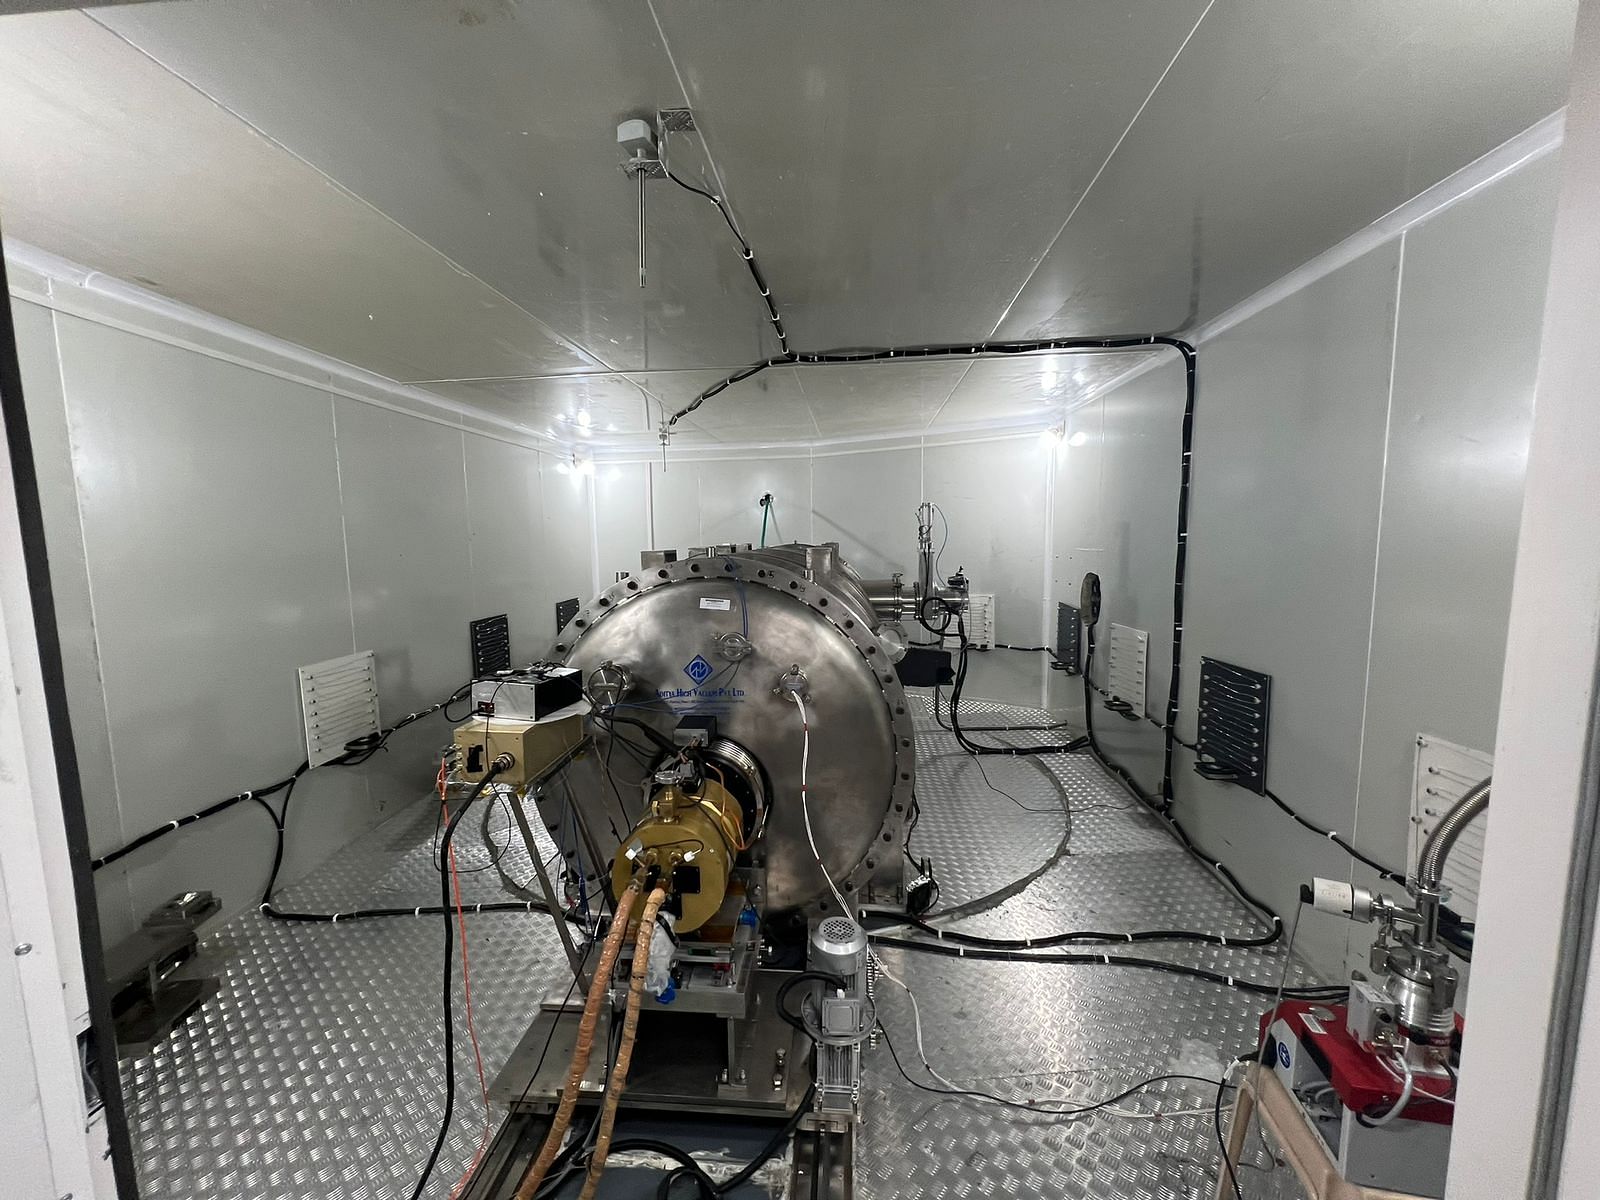 The PARAS-2 spectrograph inside a hermetically sealed, stabilised vacuum chamber. It analyses light from stars to measure their 'wobble' caused by planets (radial velocity) outside our solar system | Photo: Sandhya Ramesh | ThePrint